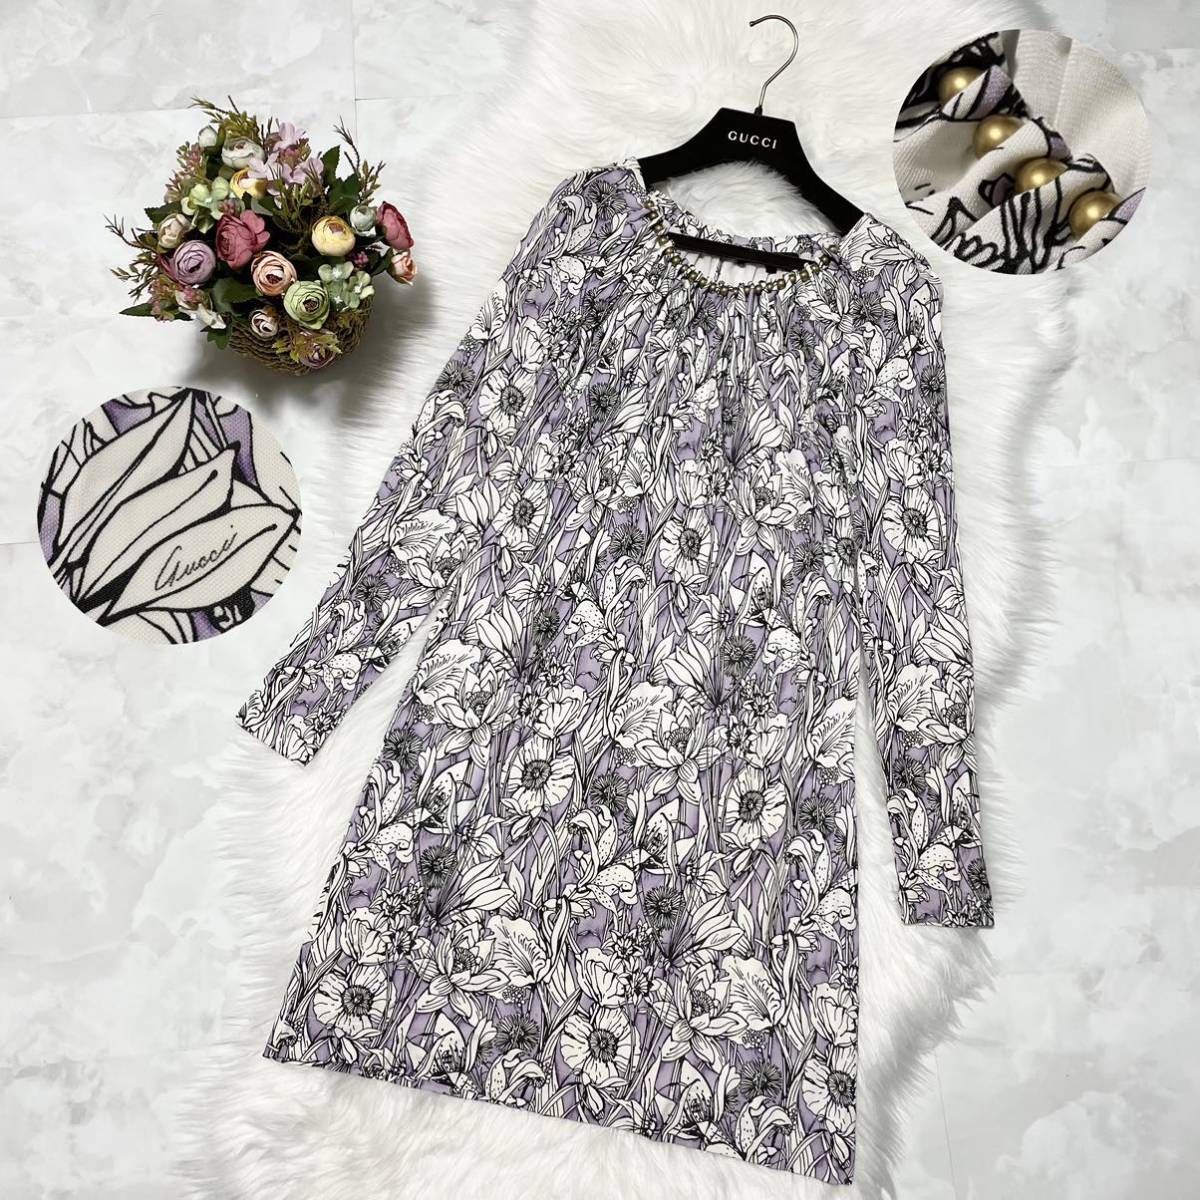  genuine article Gucci pearl equipment ornament floral print flower floral long sleeve One-piece dress S light purple series × eggshell white × black GUCCI letter pack post service plus possible 